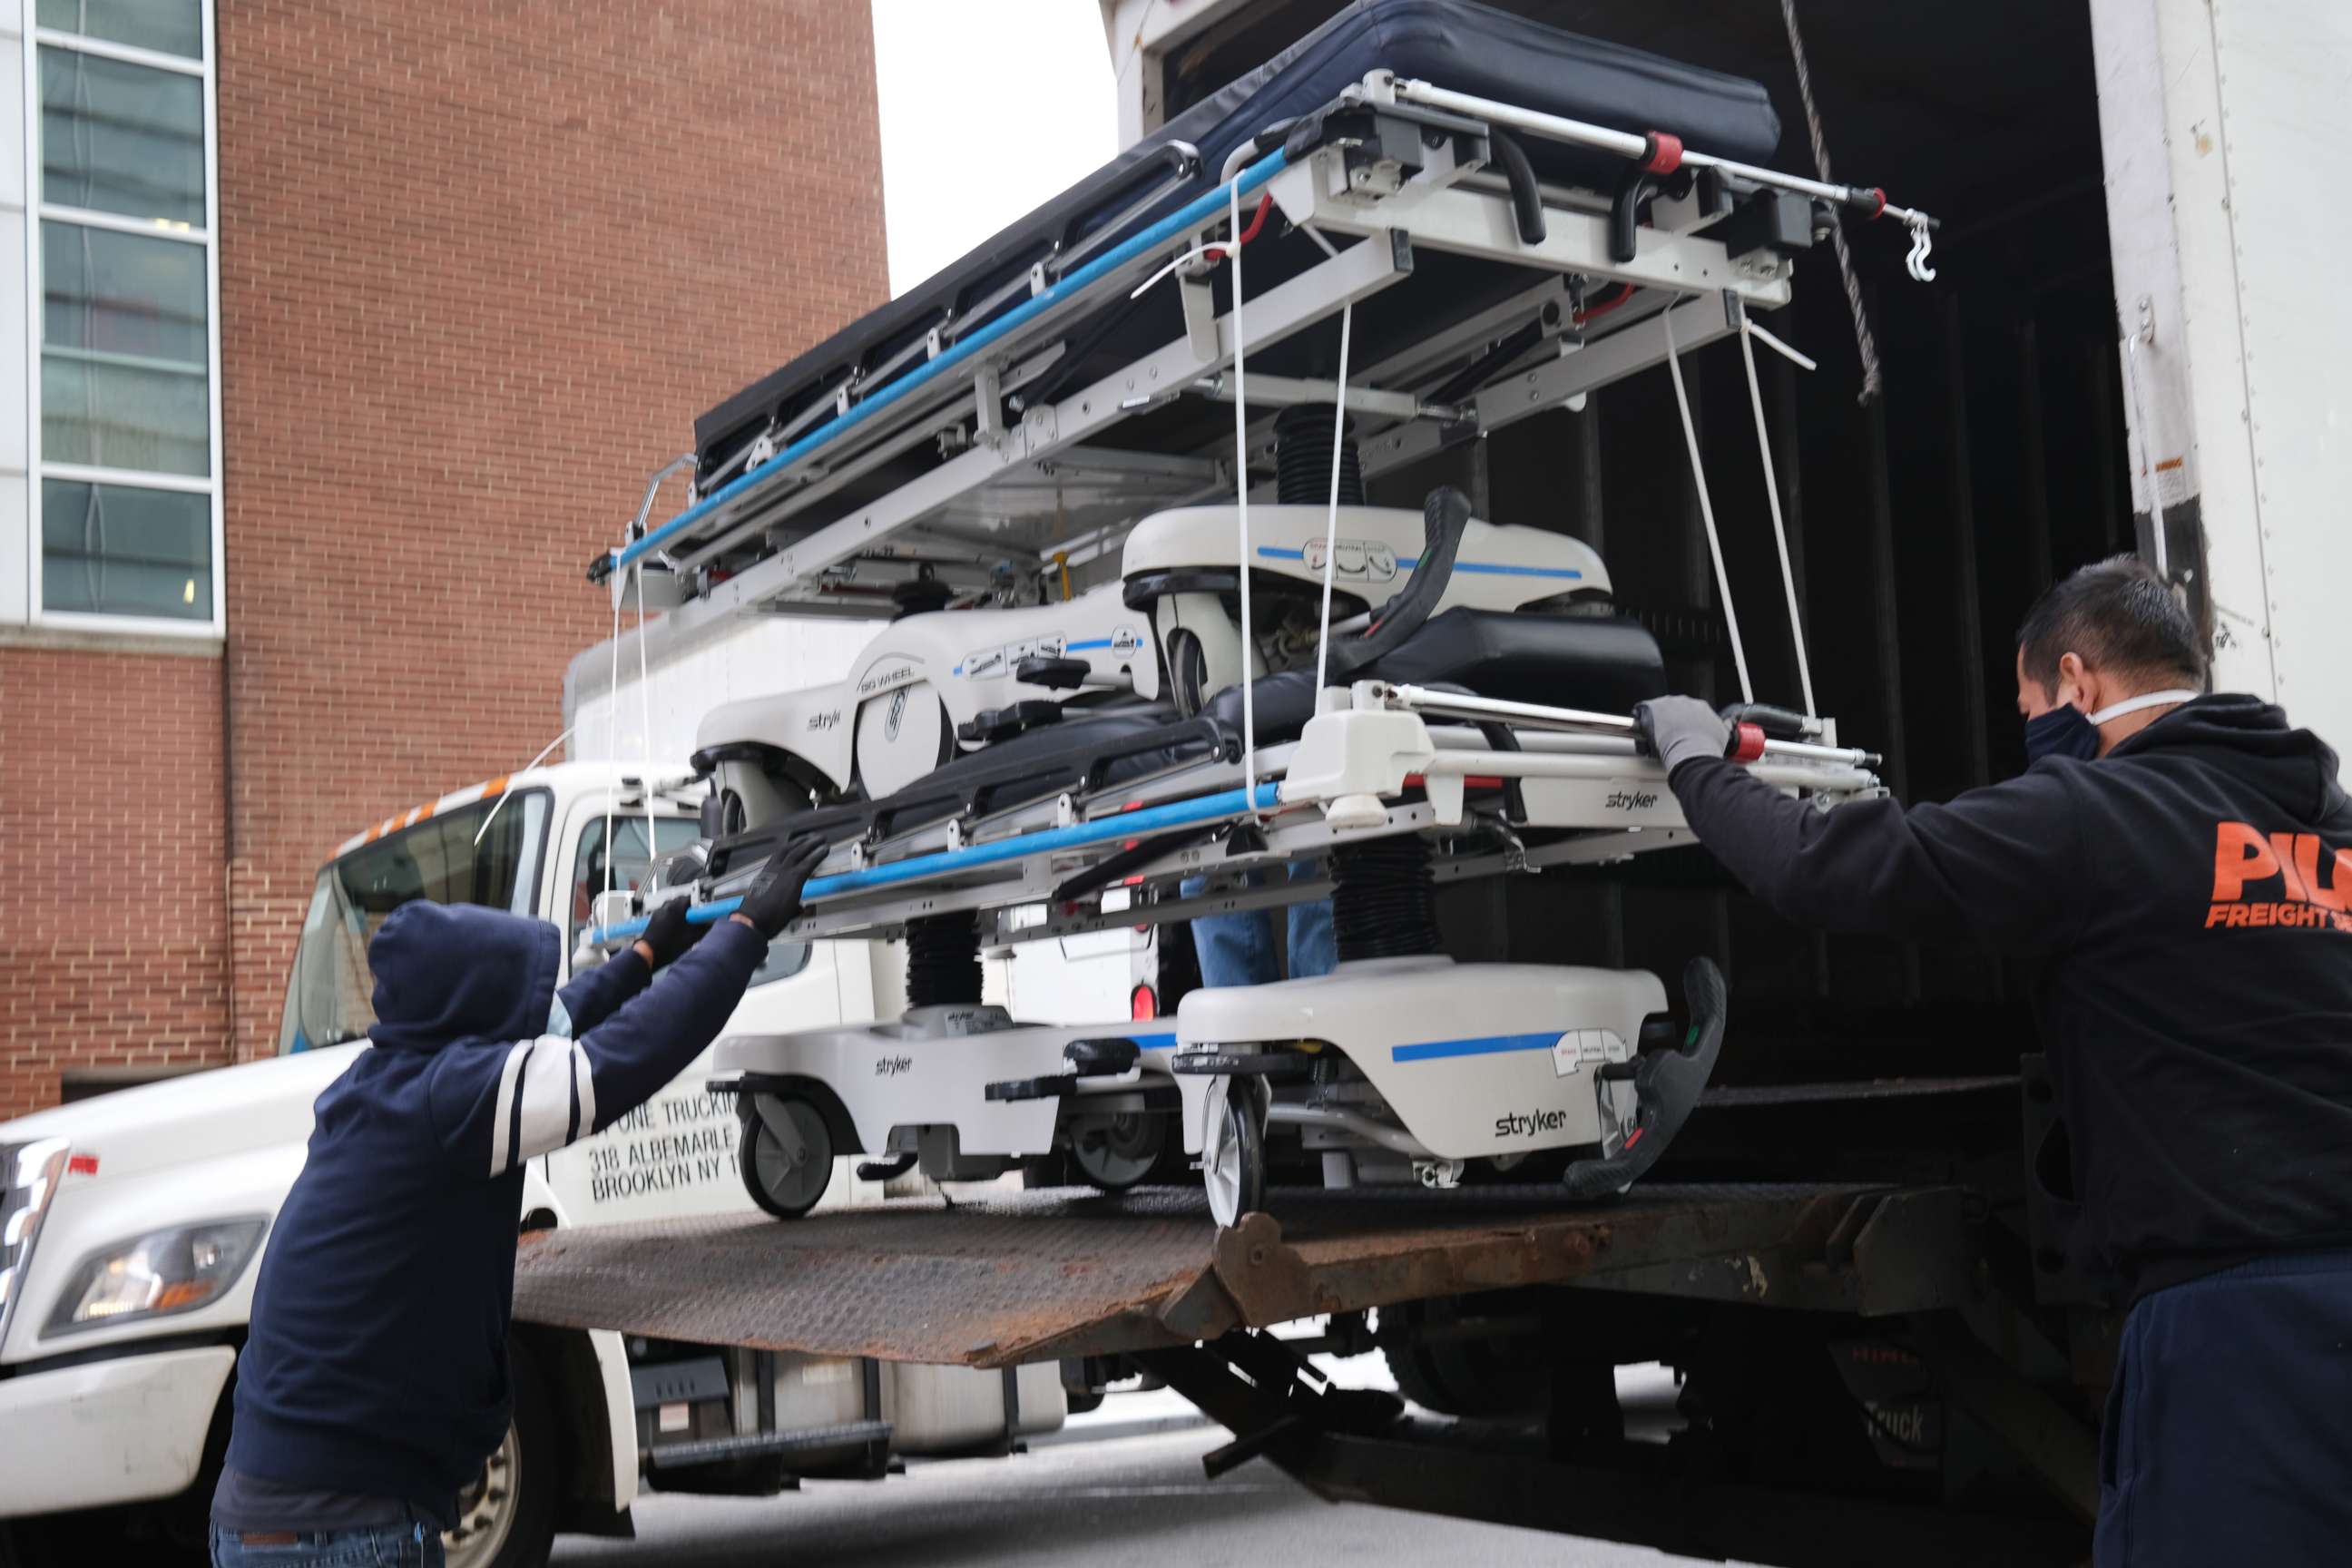 PHOTO: Extra medical beds are delivered to Maimonides Medical Center in Borough Park section of Brooklyn which has seen an upsurge of coronavirus patients, April 2, 2020 in New York.